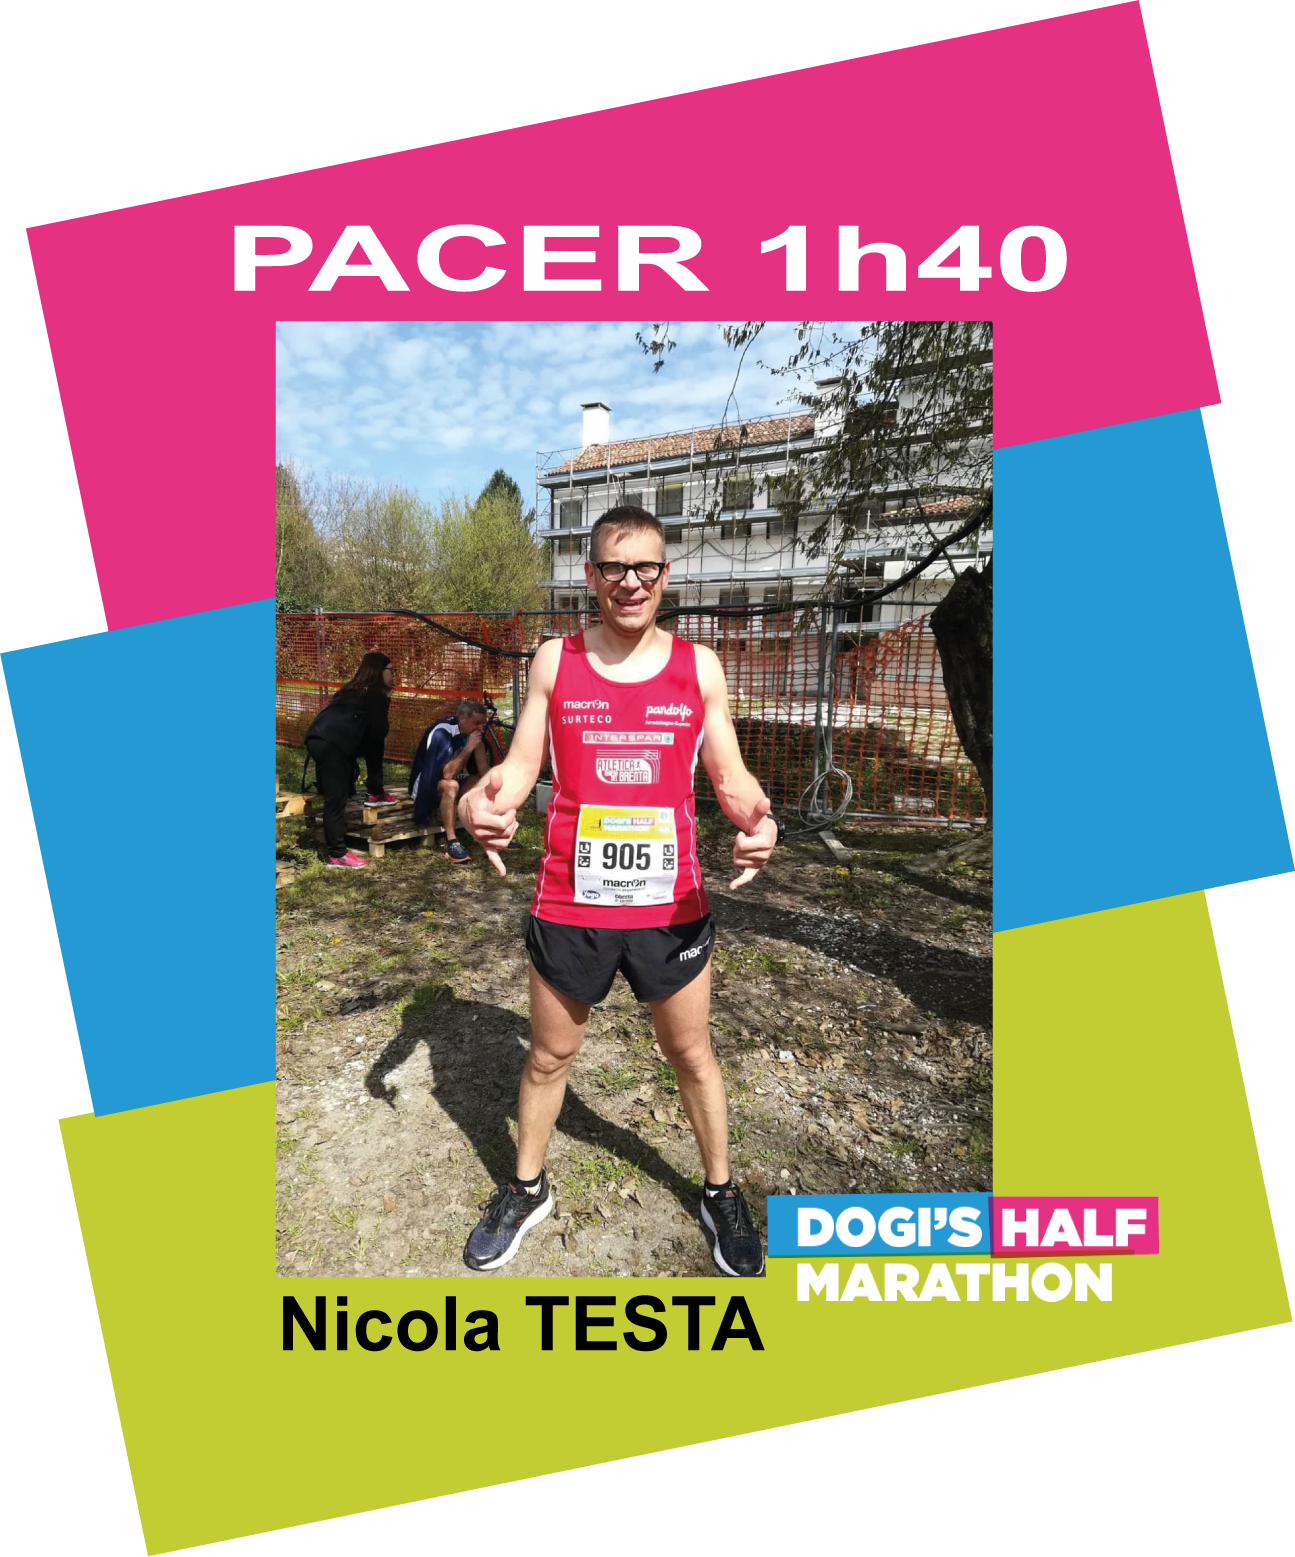 Pacer 1h40